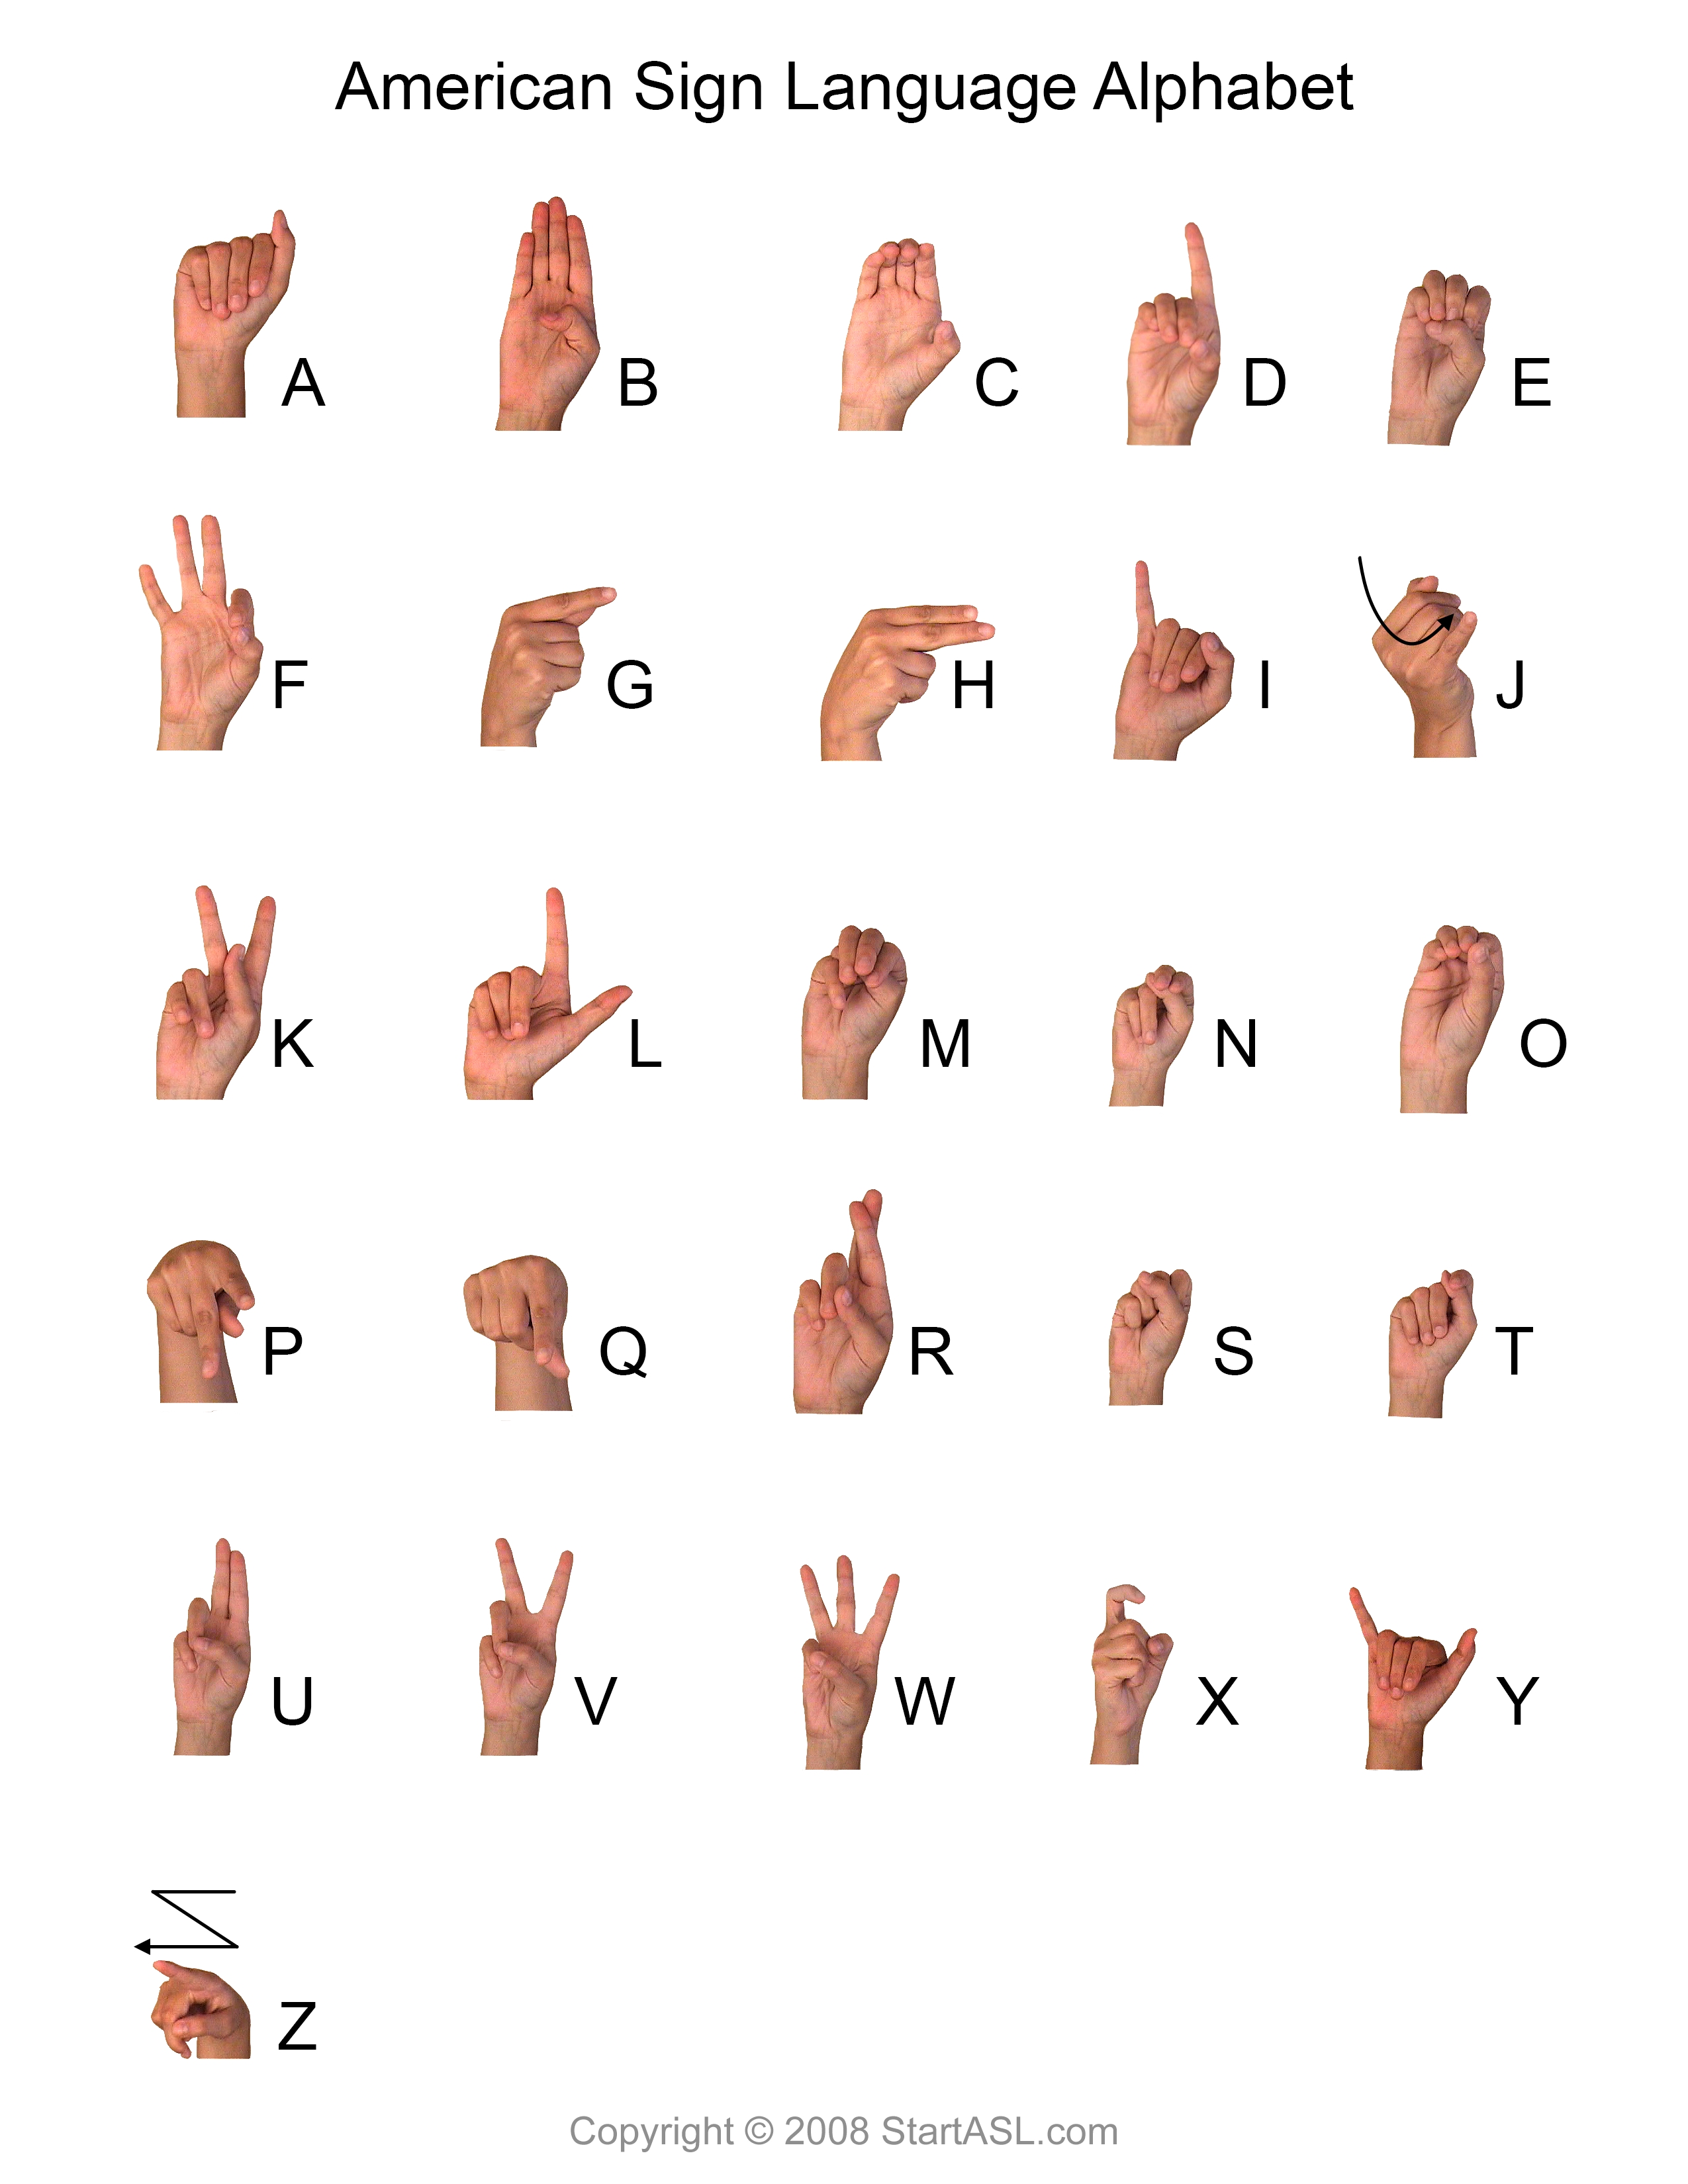 What Is The Sign Language Alphabet – Placemat asl painless placemats a2z dhabi